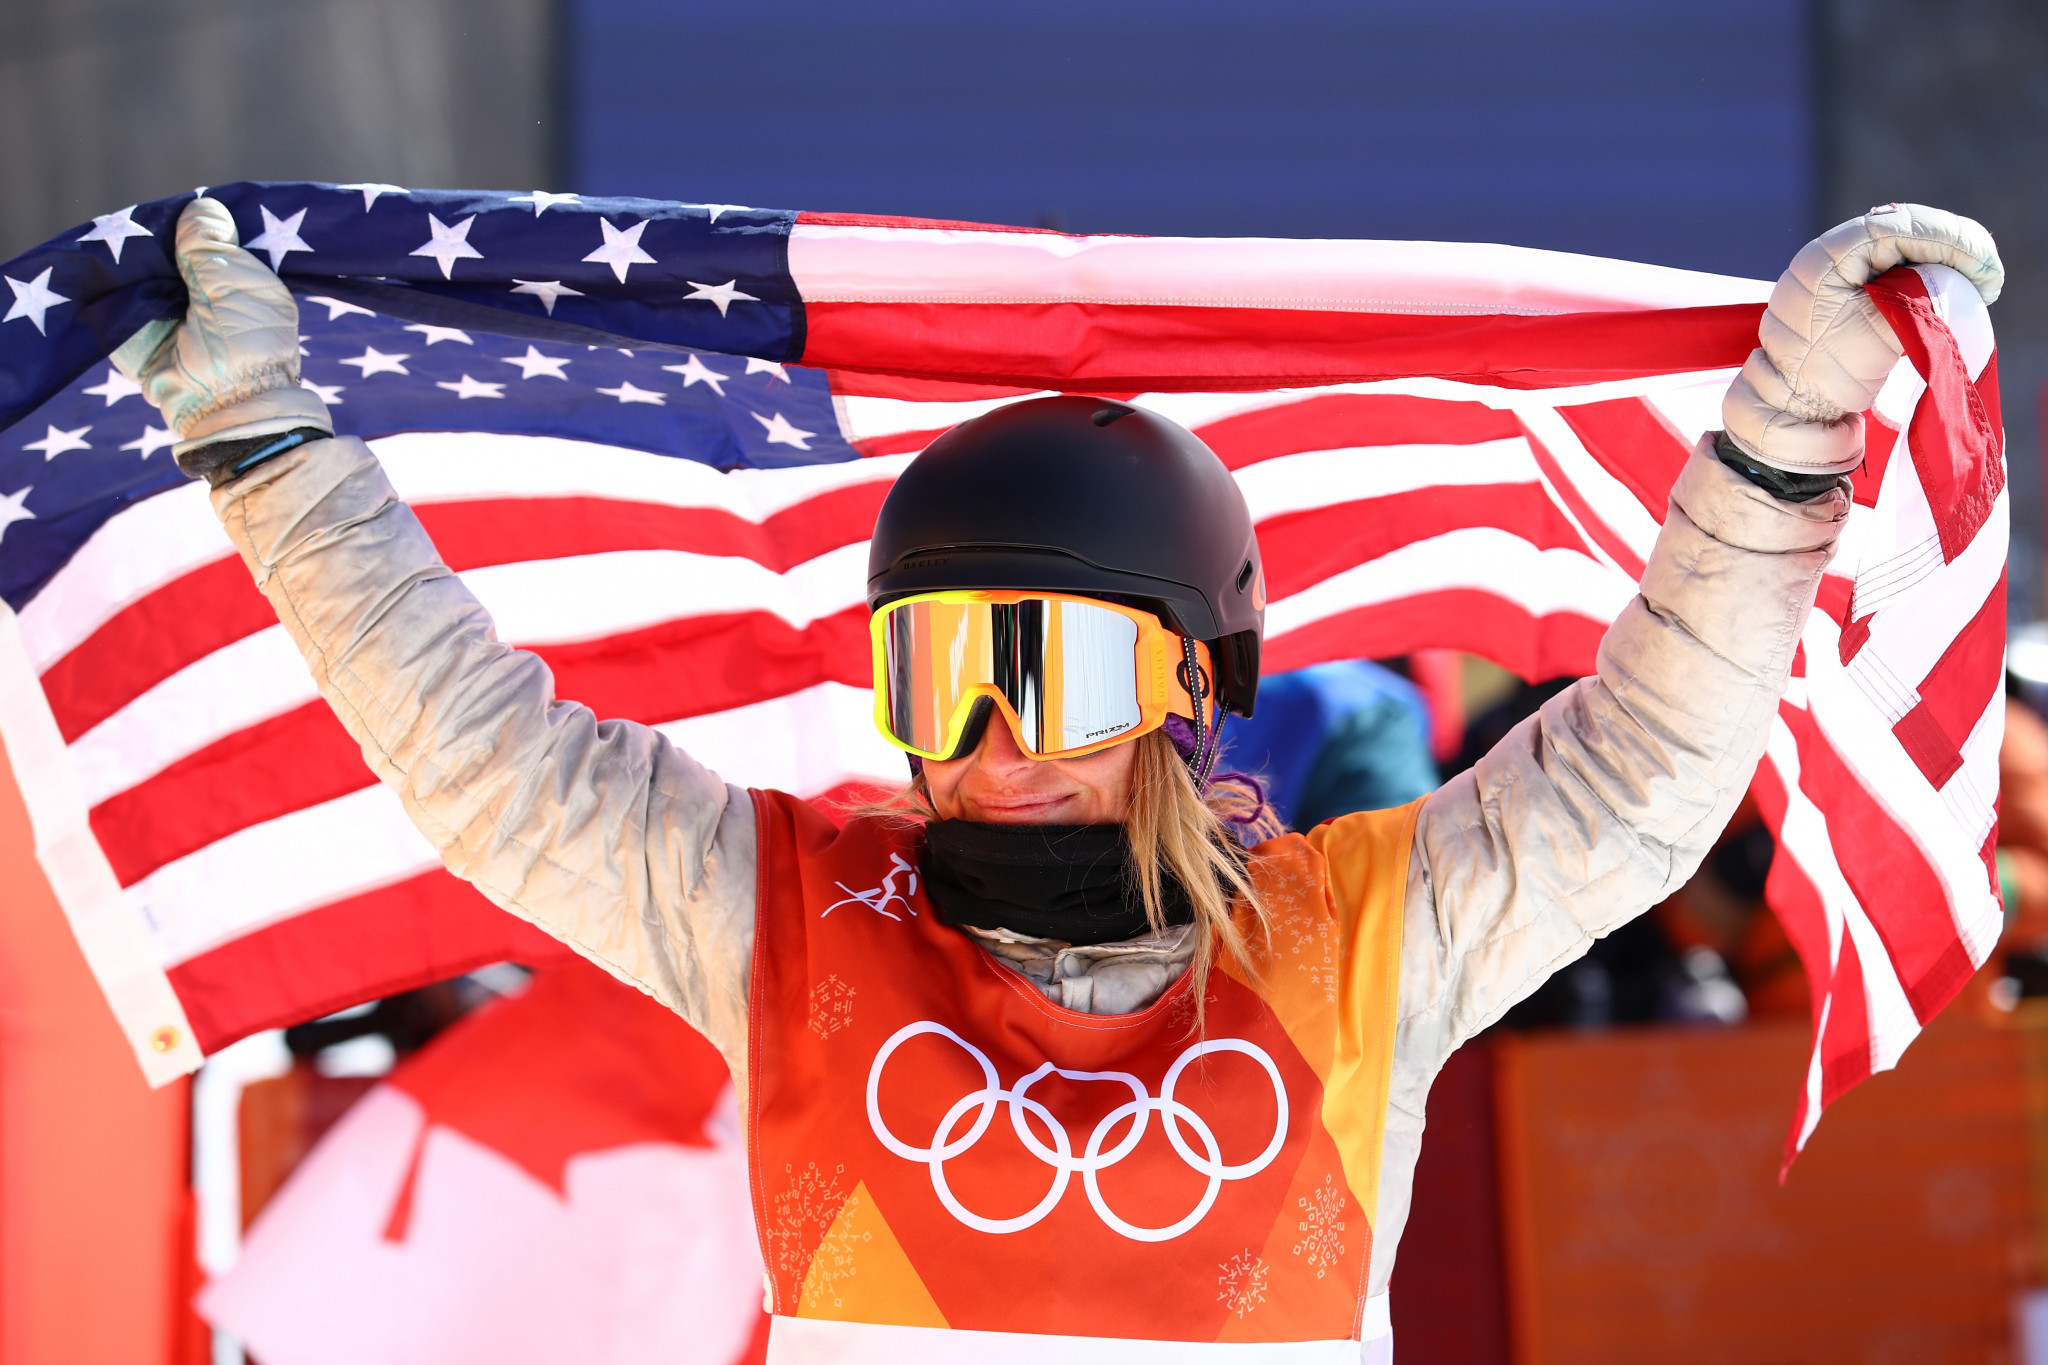 Anderson defends Olympic slopestyle title as strong winds play havoc at Pyeongchang 2018